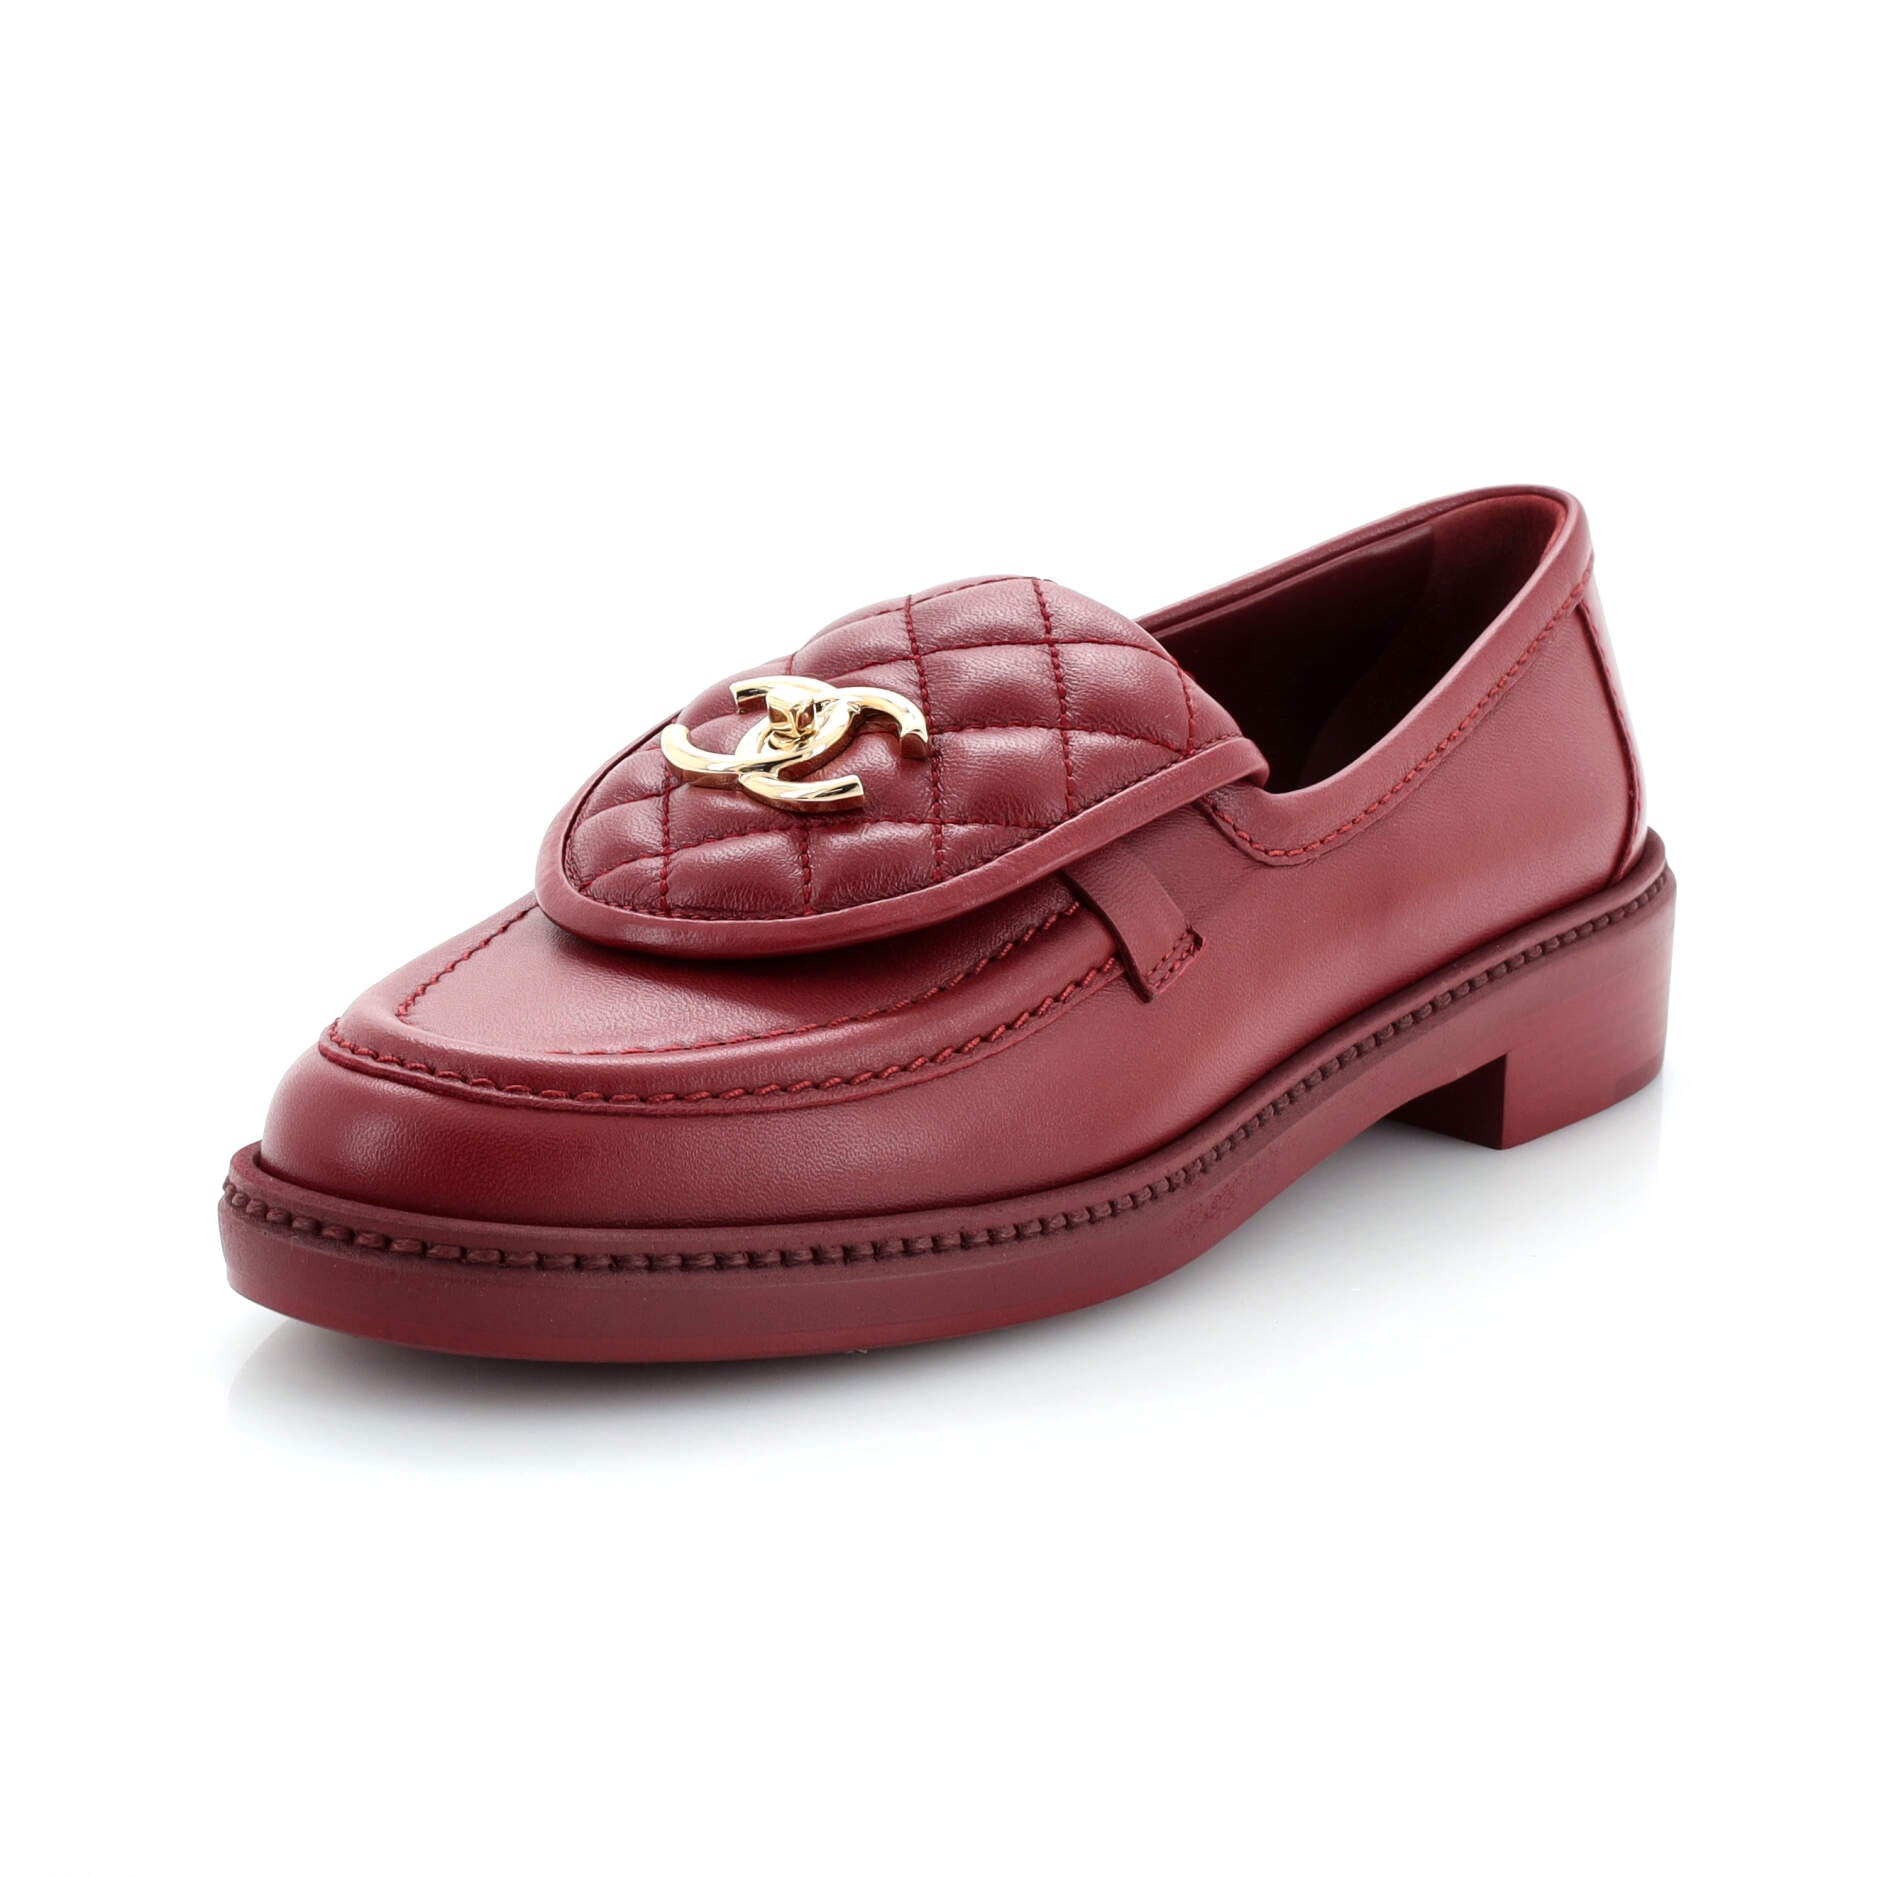 Women's CC Loafers Quilted Patent